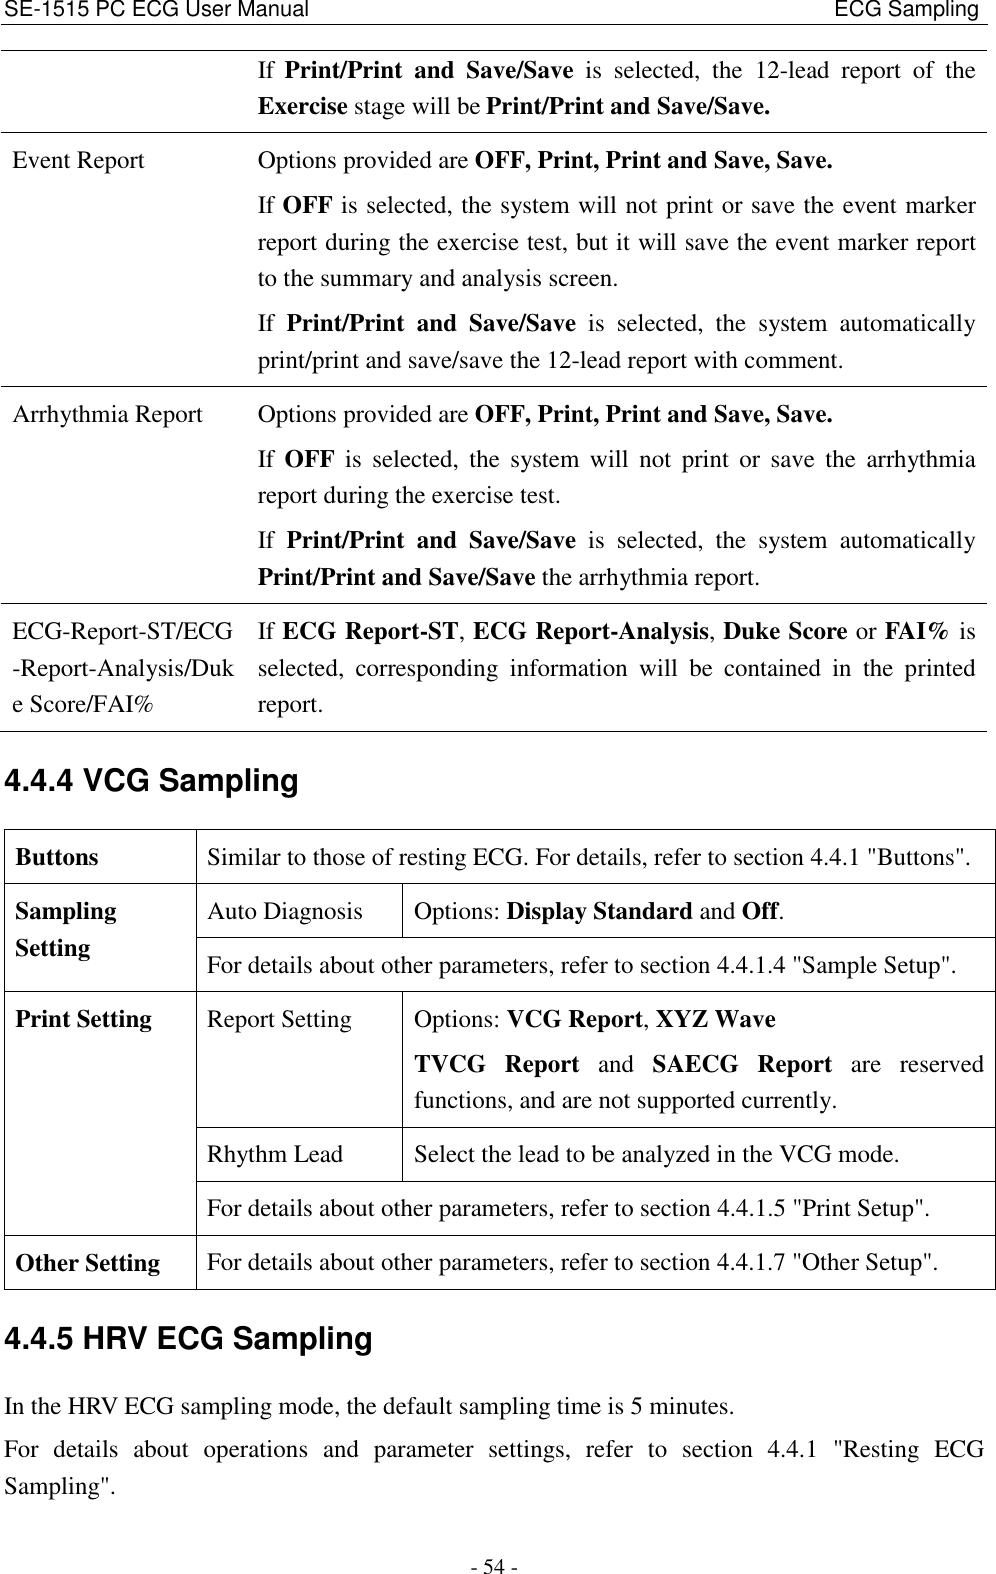 SE-1515 PC ECG User Manual                                                                                              ECG Sampling - 54 - If Print/Print  and  Save/Save  is  selected,  the  12-lead  report  of  the Exercise stage will be Print/Print and Save/Save. Event Report Options provided are OFF, Print, Print and Save, Save. If OFF is selected, the system will not print or save the event marker report during the exercise test, but it will save the event marker report to the summary and analysis screen. If  Print/Print  and  Save/Save  is  selected,  the  system  automatically print/print and save/save the 12-lead report with comment. Arrhythmia Report Options provided are OFF, Print, Print and Save, Save. If  OFF  is  selected,  the  system  will  not  print  or  save  the  arrhythmia report during the exercise test. If  Print/Print  and  Save/Save  is  selected,  the  system  automatically Print/Print and Save/Save the arrhythmia report. ECG-Report-ST/ECG-Report-Analysis/Duke Score/FAI% If ECG Report-ST, ECG Report-Analysis, Duke Score or FAI% is selected,  corresponding  information  will  be  contained  in  the  printed report. 4.4.4 VCG Sampling Buttons Similar to those of resting ECG. For details, refer to section 4.4.1 &quot;Buttons&quot;. Sampling Setting Auto Diagnosis Options: Display Standard and Off. For details about other parameters, refer to section 4.4.1.4 &quot;Sample Setup&quot;. Print Setting Report Setting Options: VCG Report, XYZ Wave TVCG  Report  and  SAECG  Report  are  reserved functions, and are not supported currently. Rhythm Lead Select the lead to be analyzed in the VCG mode. For details about other parameters, refer to section 4.4.1.5 &quot;Print Setup&quot;. Other Setting For details about other parameters, refer to section 4.4.1.7 &quot;Other Setup&quot;. 4.4.5 HRV ECG Sampling In the HRV ECG sampling mode, the default sampling time is 5 minutes. For  details  about  operations  and  parameter  settings,  refer  to  section  4.4.1  &quot;Resting  ECG Sampling&quot;. 